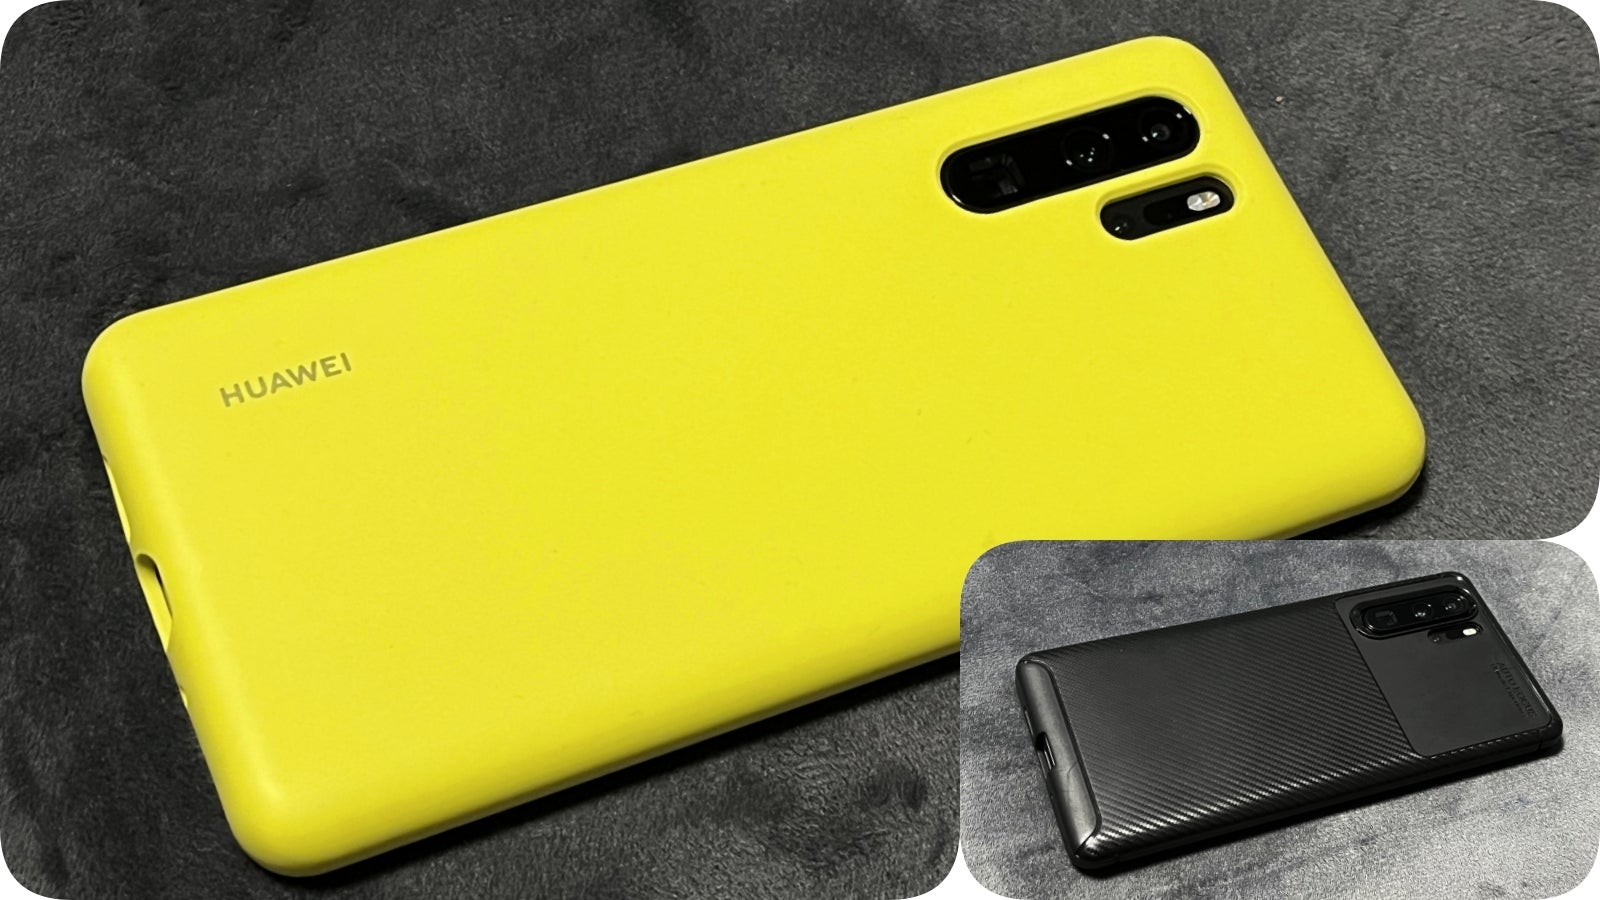 I guess my 2019 Huawei P30 Pro looks good again.  This case did not cost $800.  - The new yellow iPhone 14 is a mind game: millions to fall for the best but worst Apple deal ever?